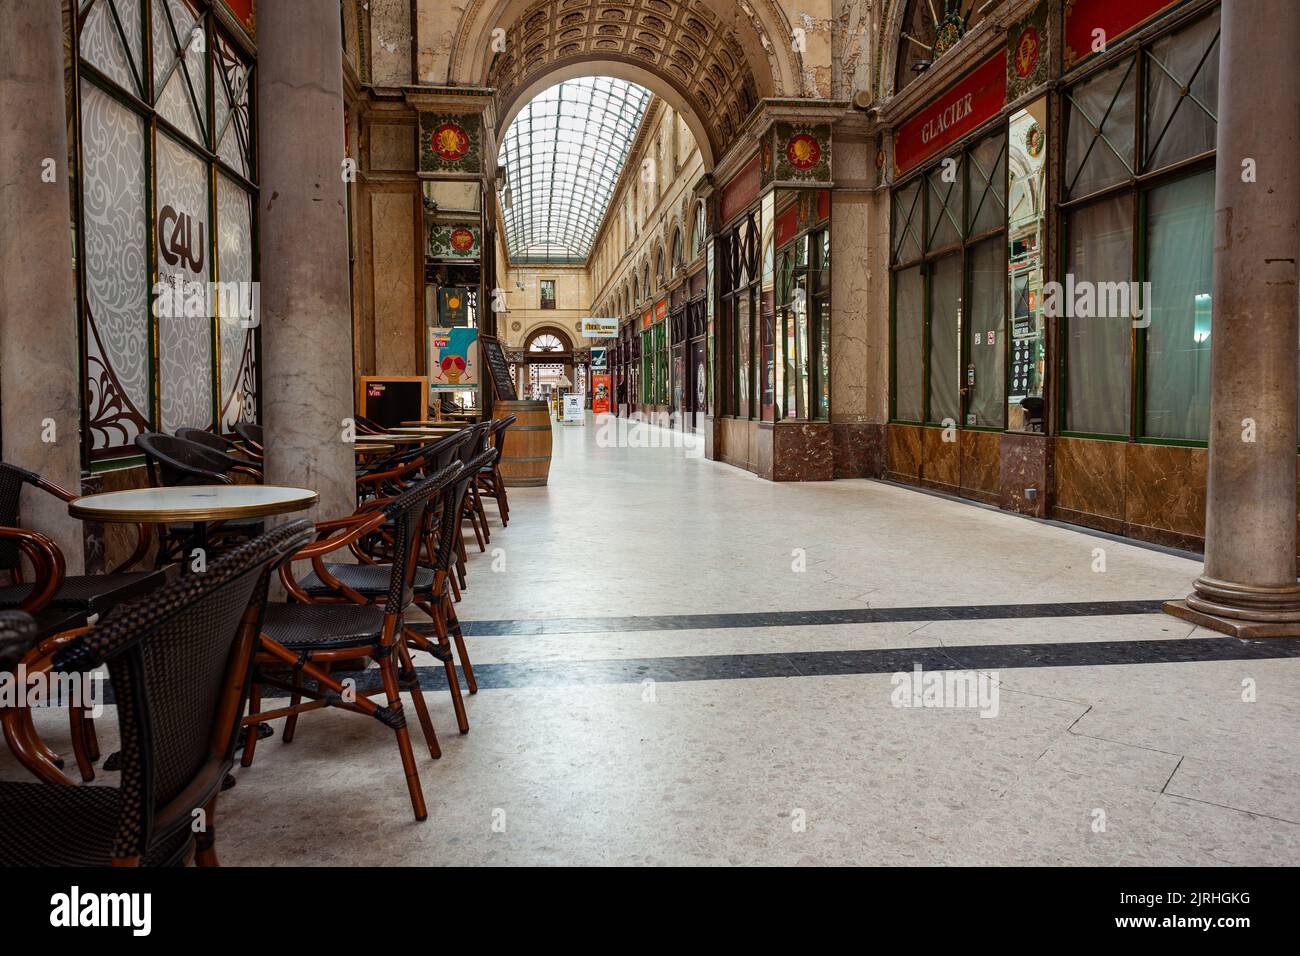 Bordeaux, France - July, 17: Interior of the Galerie Bordelaise or Galerie de la Torre, a beautiful shopping center or arcade which was built in 1834 Stock Photo